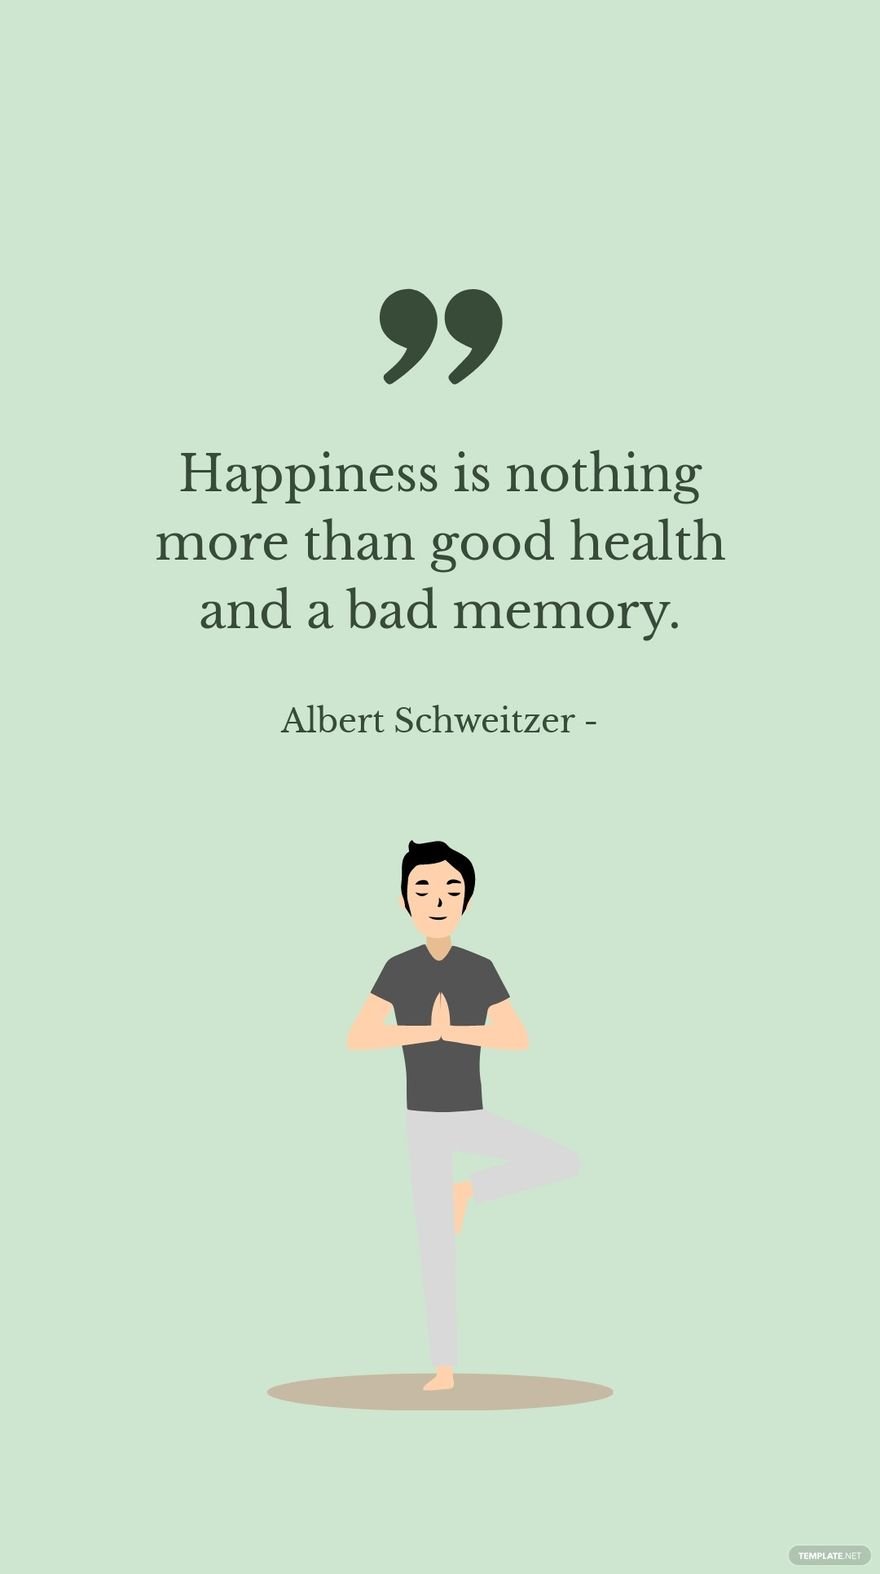 Albert Schweitzer - Happiness is nothing more than good health and a bad memory.